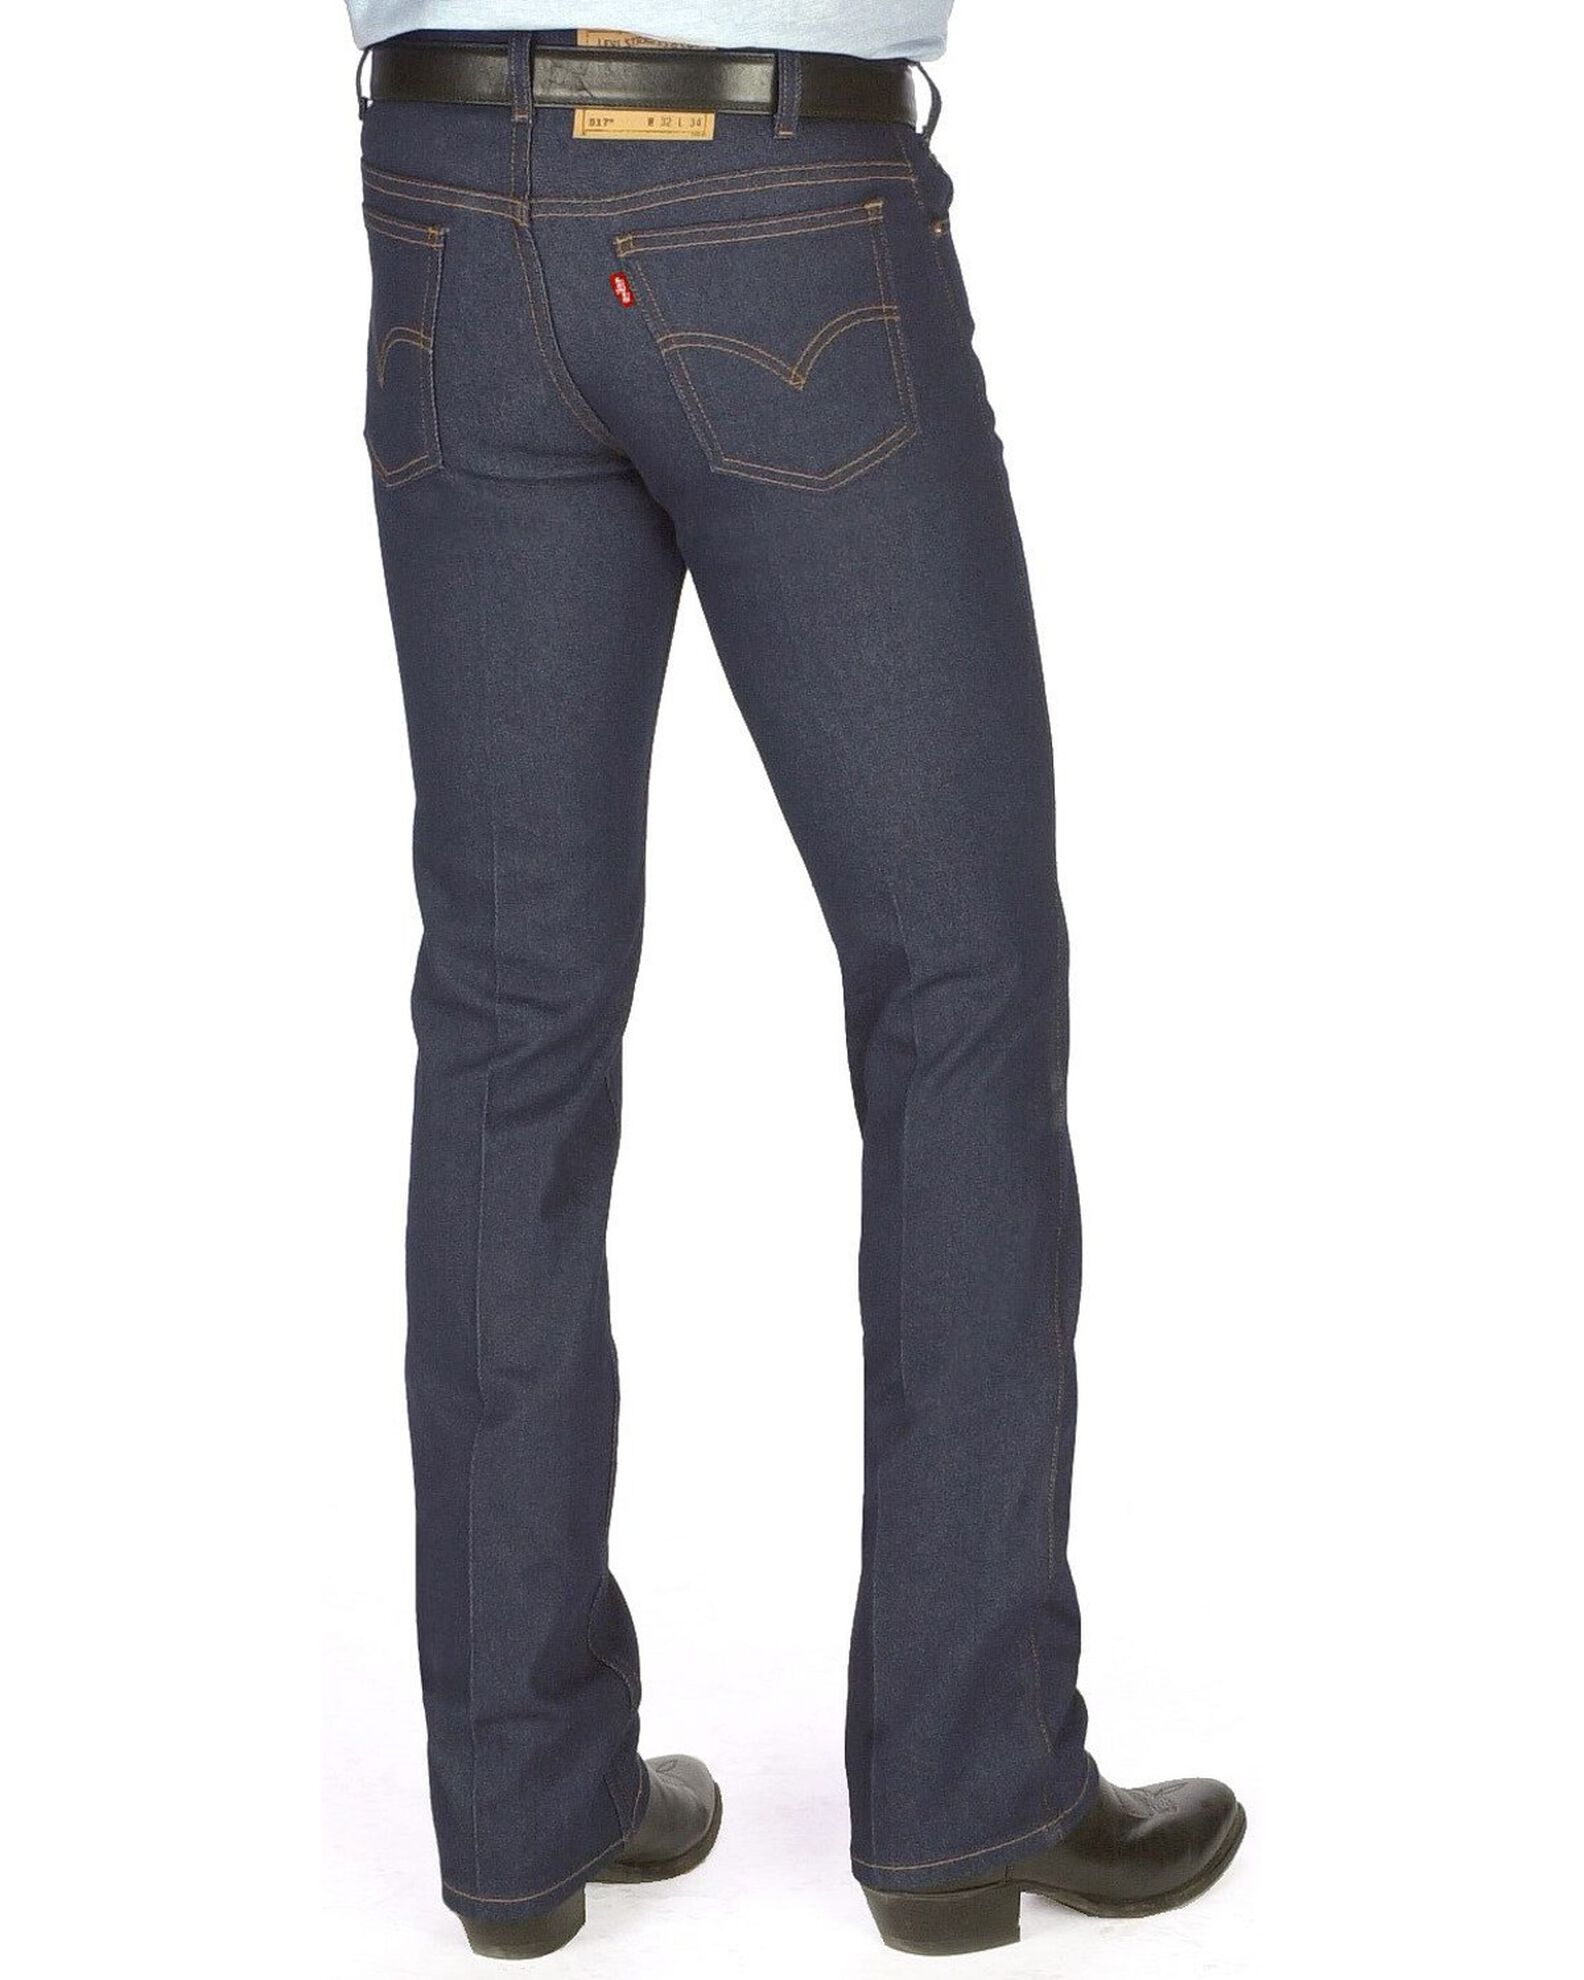 Levi's Men's 517 Indigo Slim Fit Bootcut Jeans - Big and Tall